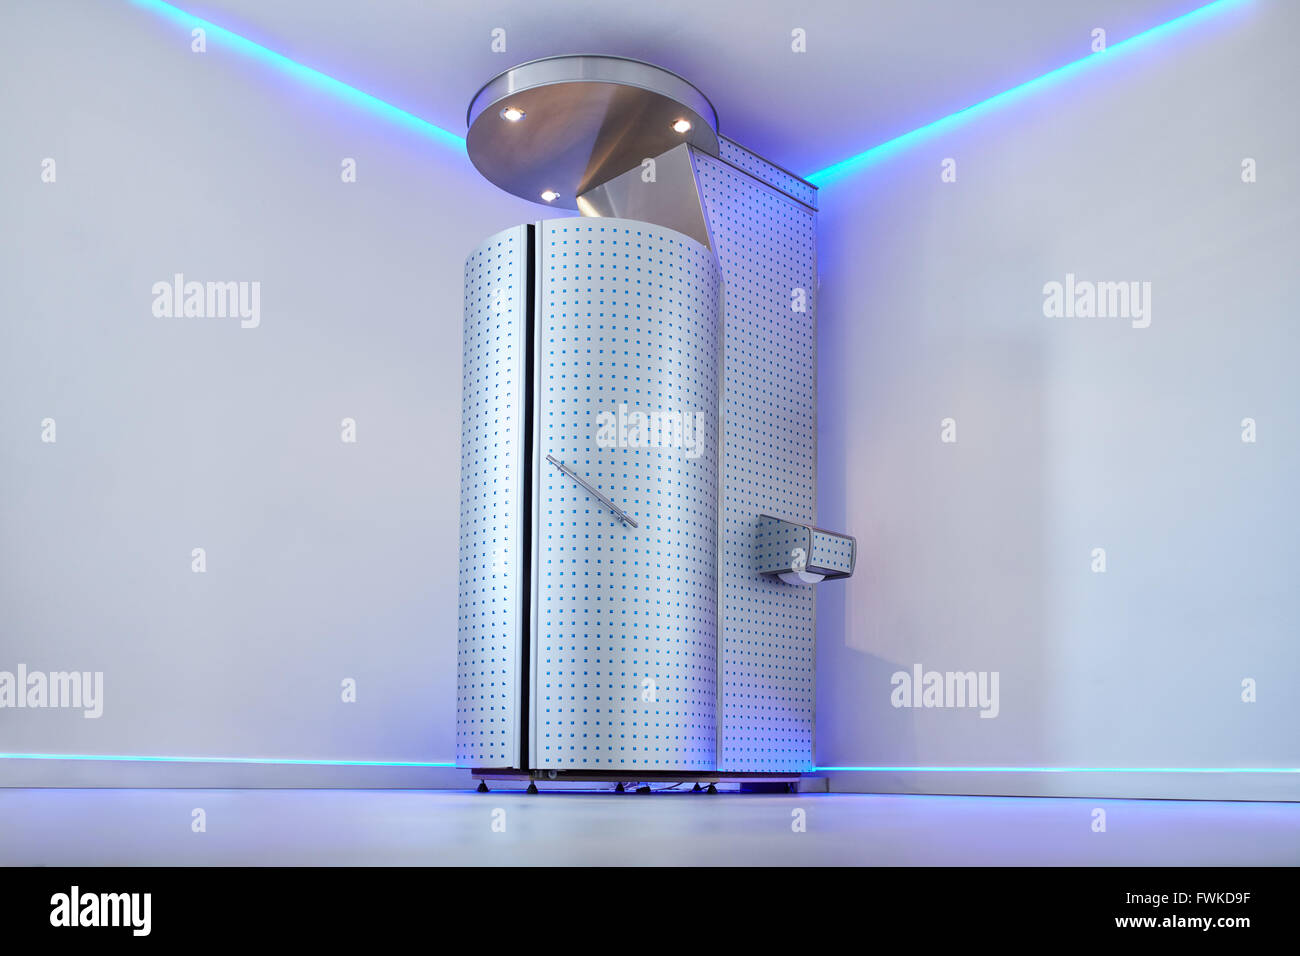 Cryo sauna for whole body cryotherapy treatment. Cryotherapy booth in cosmetology clinic. Whole body cryotherapy treatment for p Stock Photo